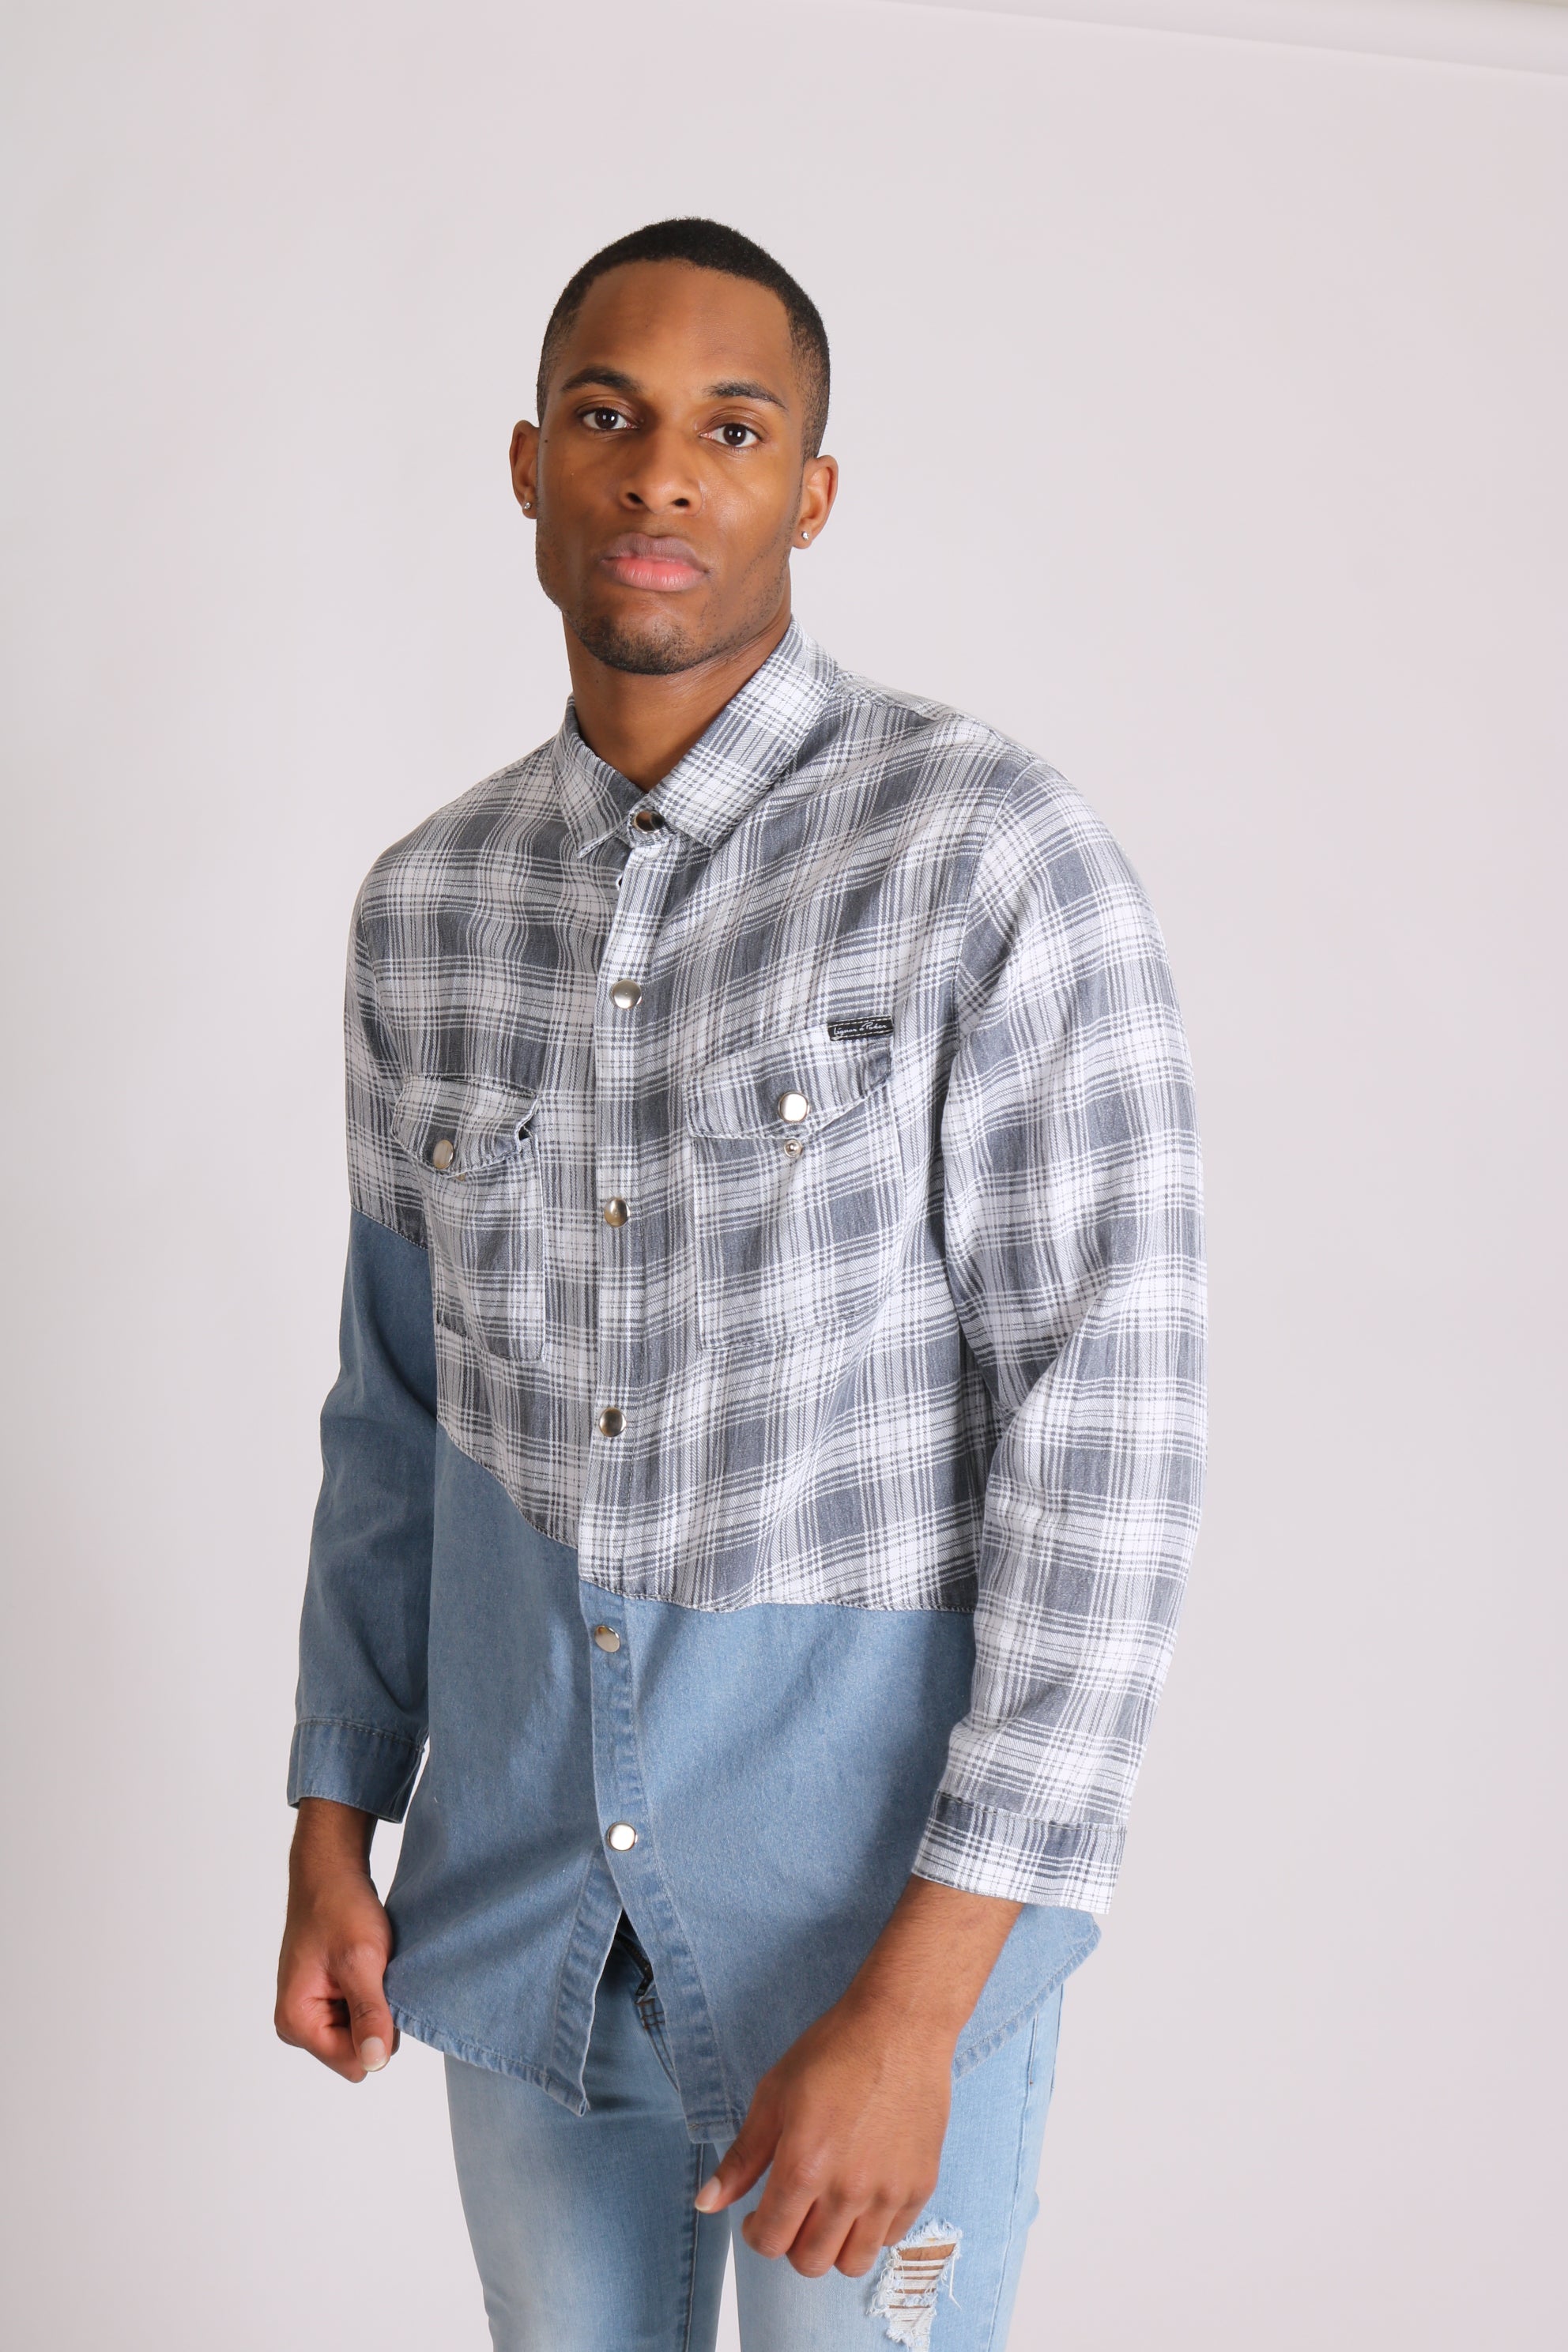 Cleveland Light Denim Shirt With Contrast Flannel Check